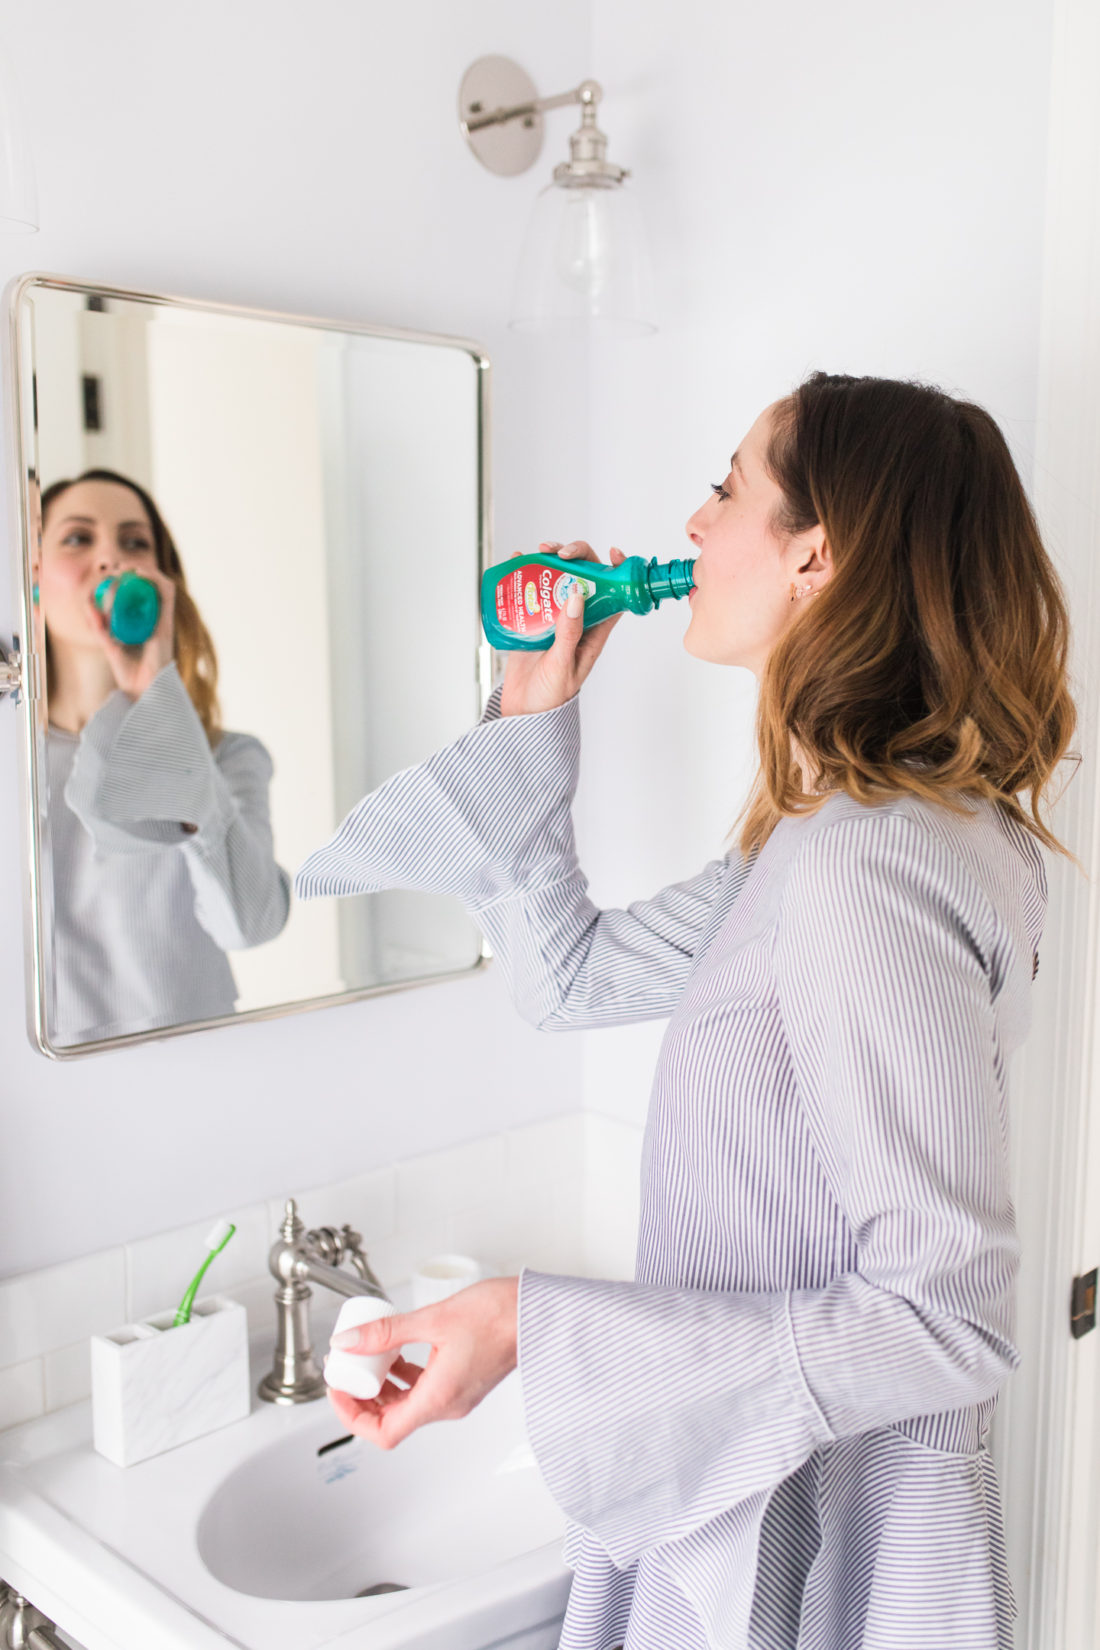 Eva Amurri Martino wears a white and blue pinstripe top and tags a swig of Colgate mouthwash in the bathroom of her Connecticut home